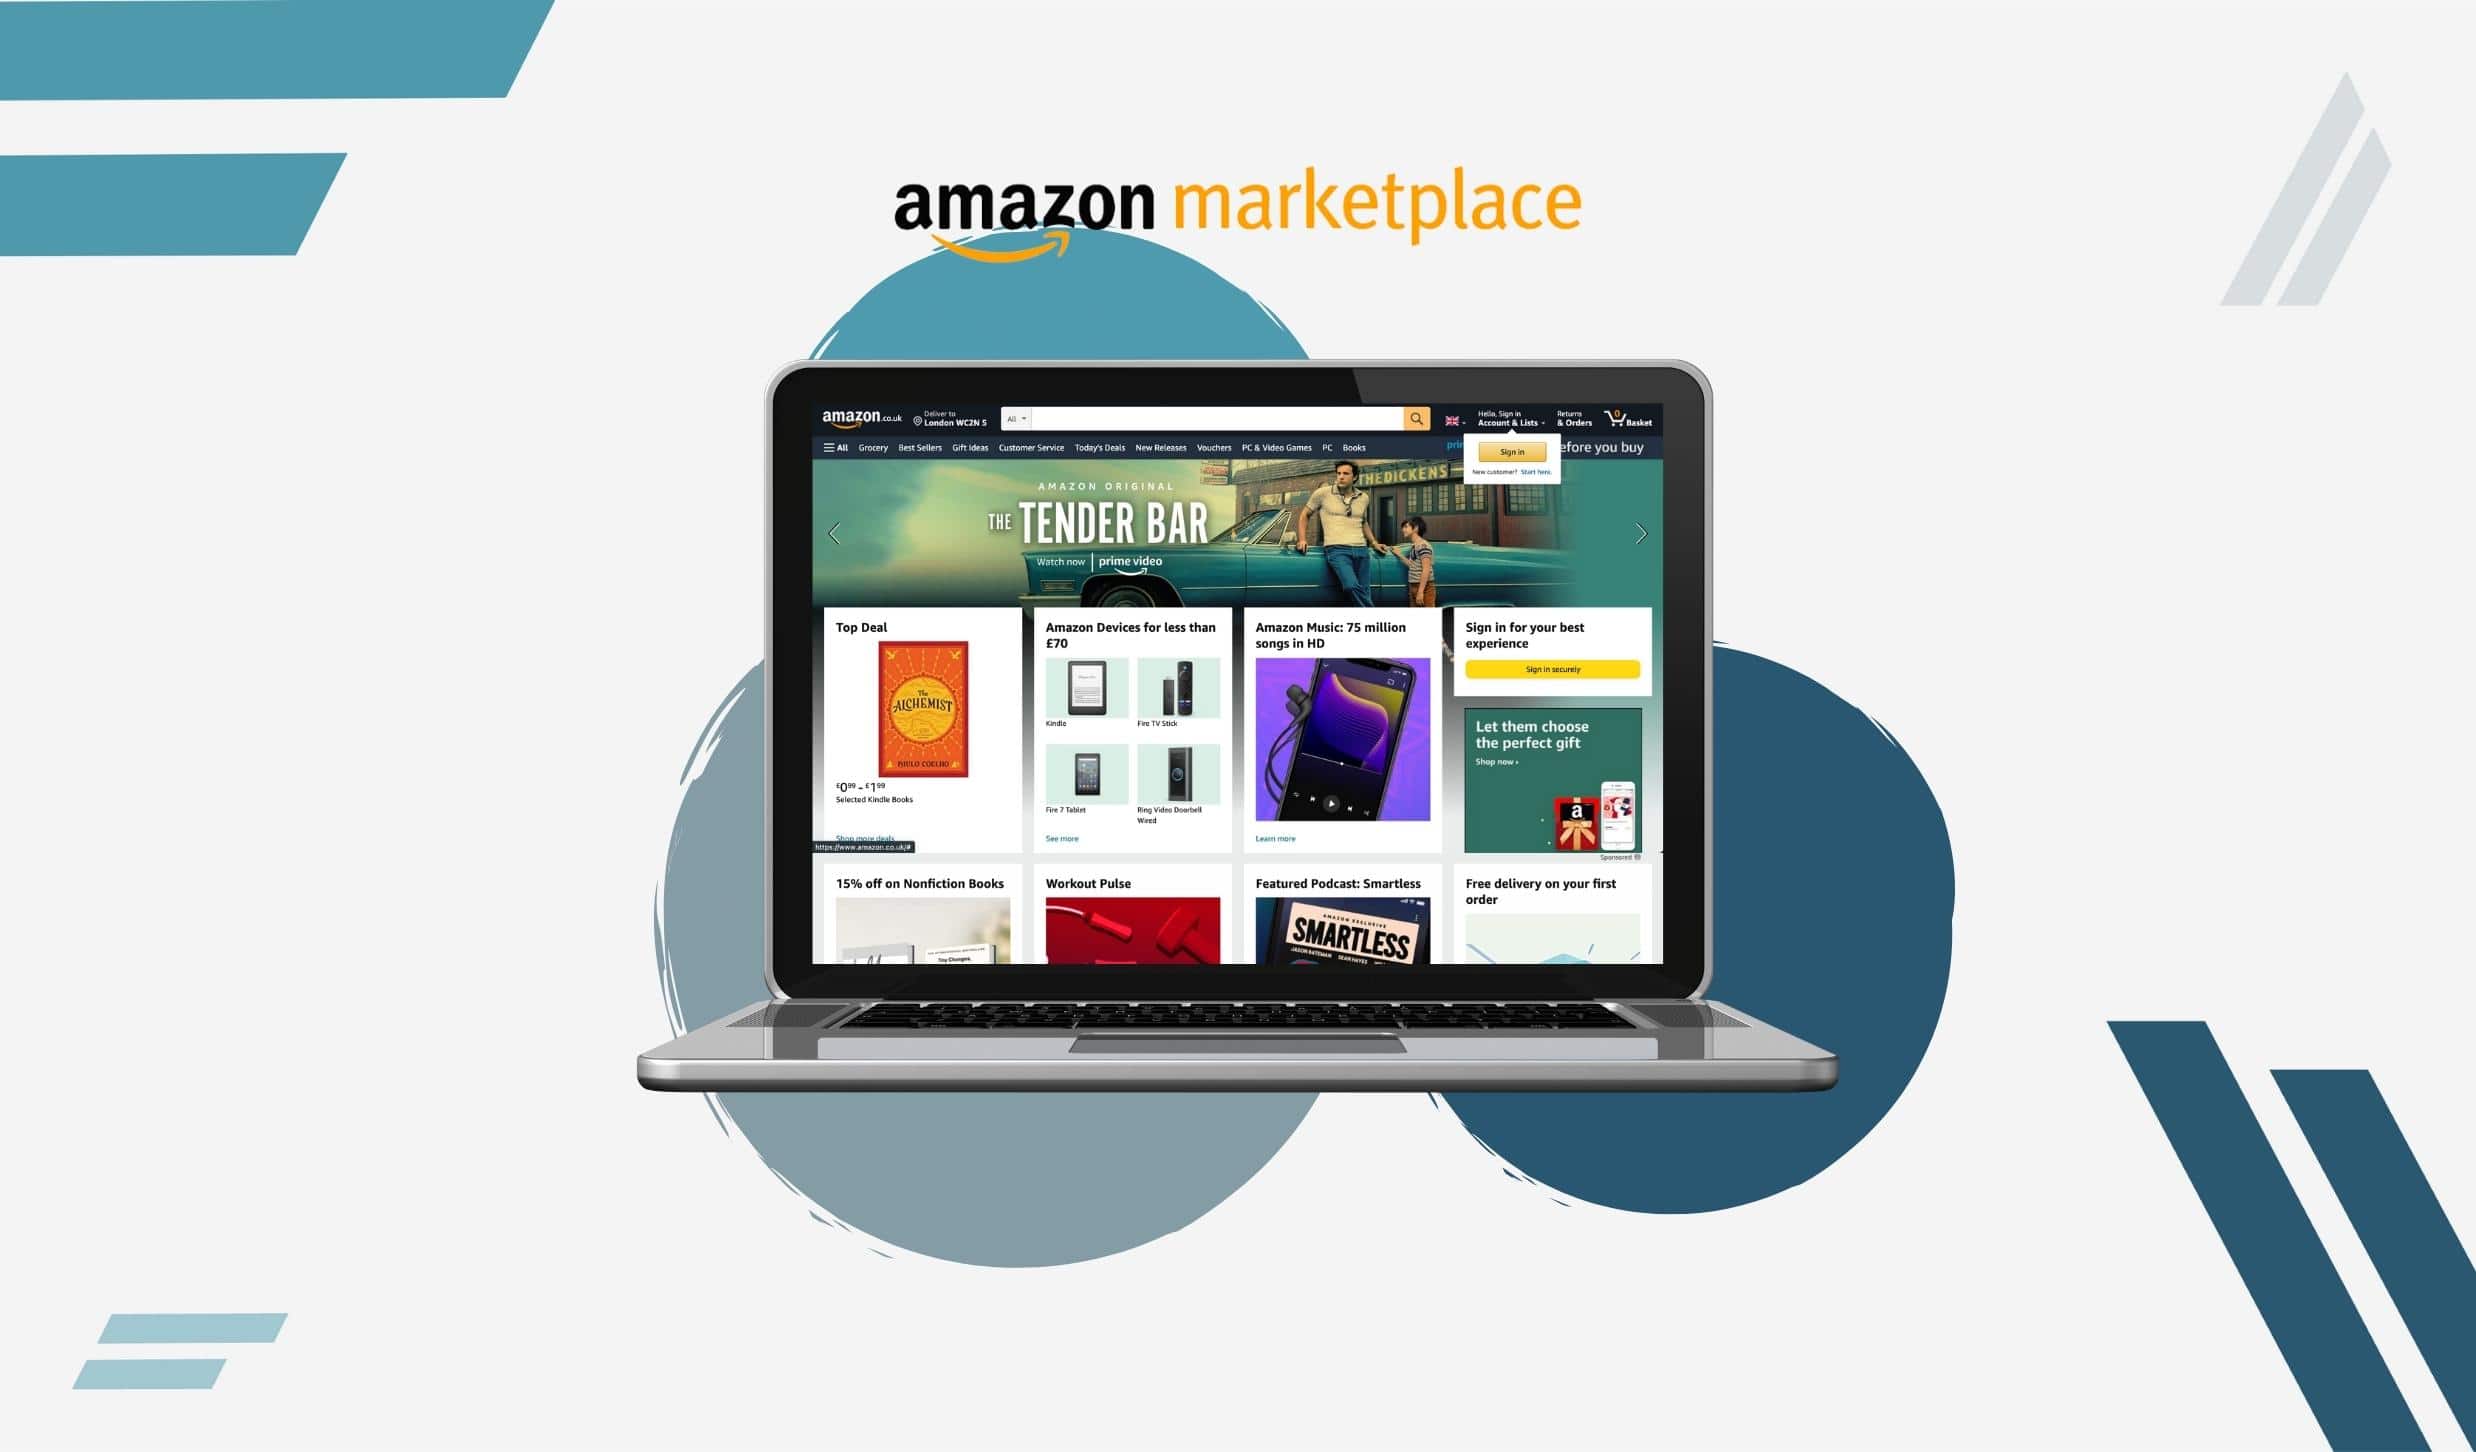 Is Amazon Marketplace The Right One For My Brand? 4 Tricks To Make Your Product Shine